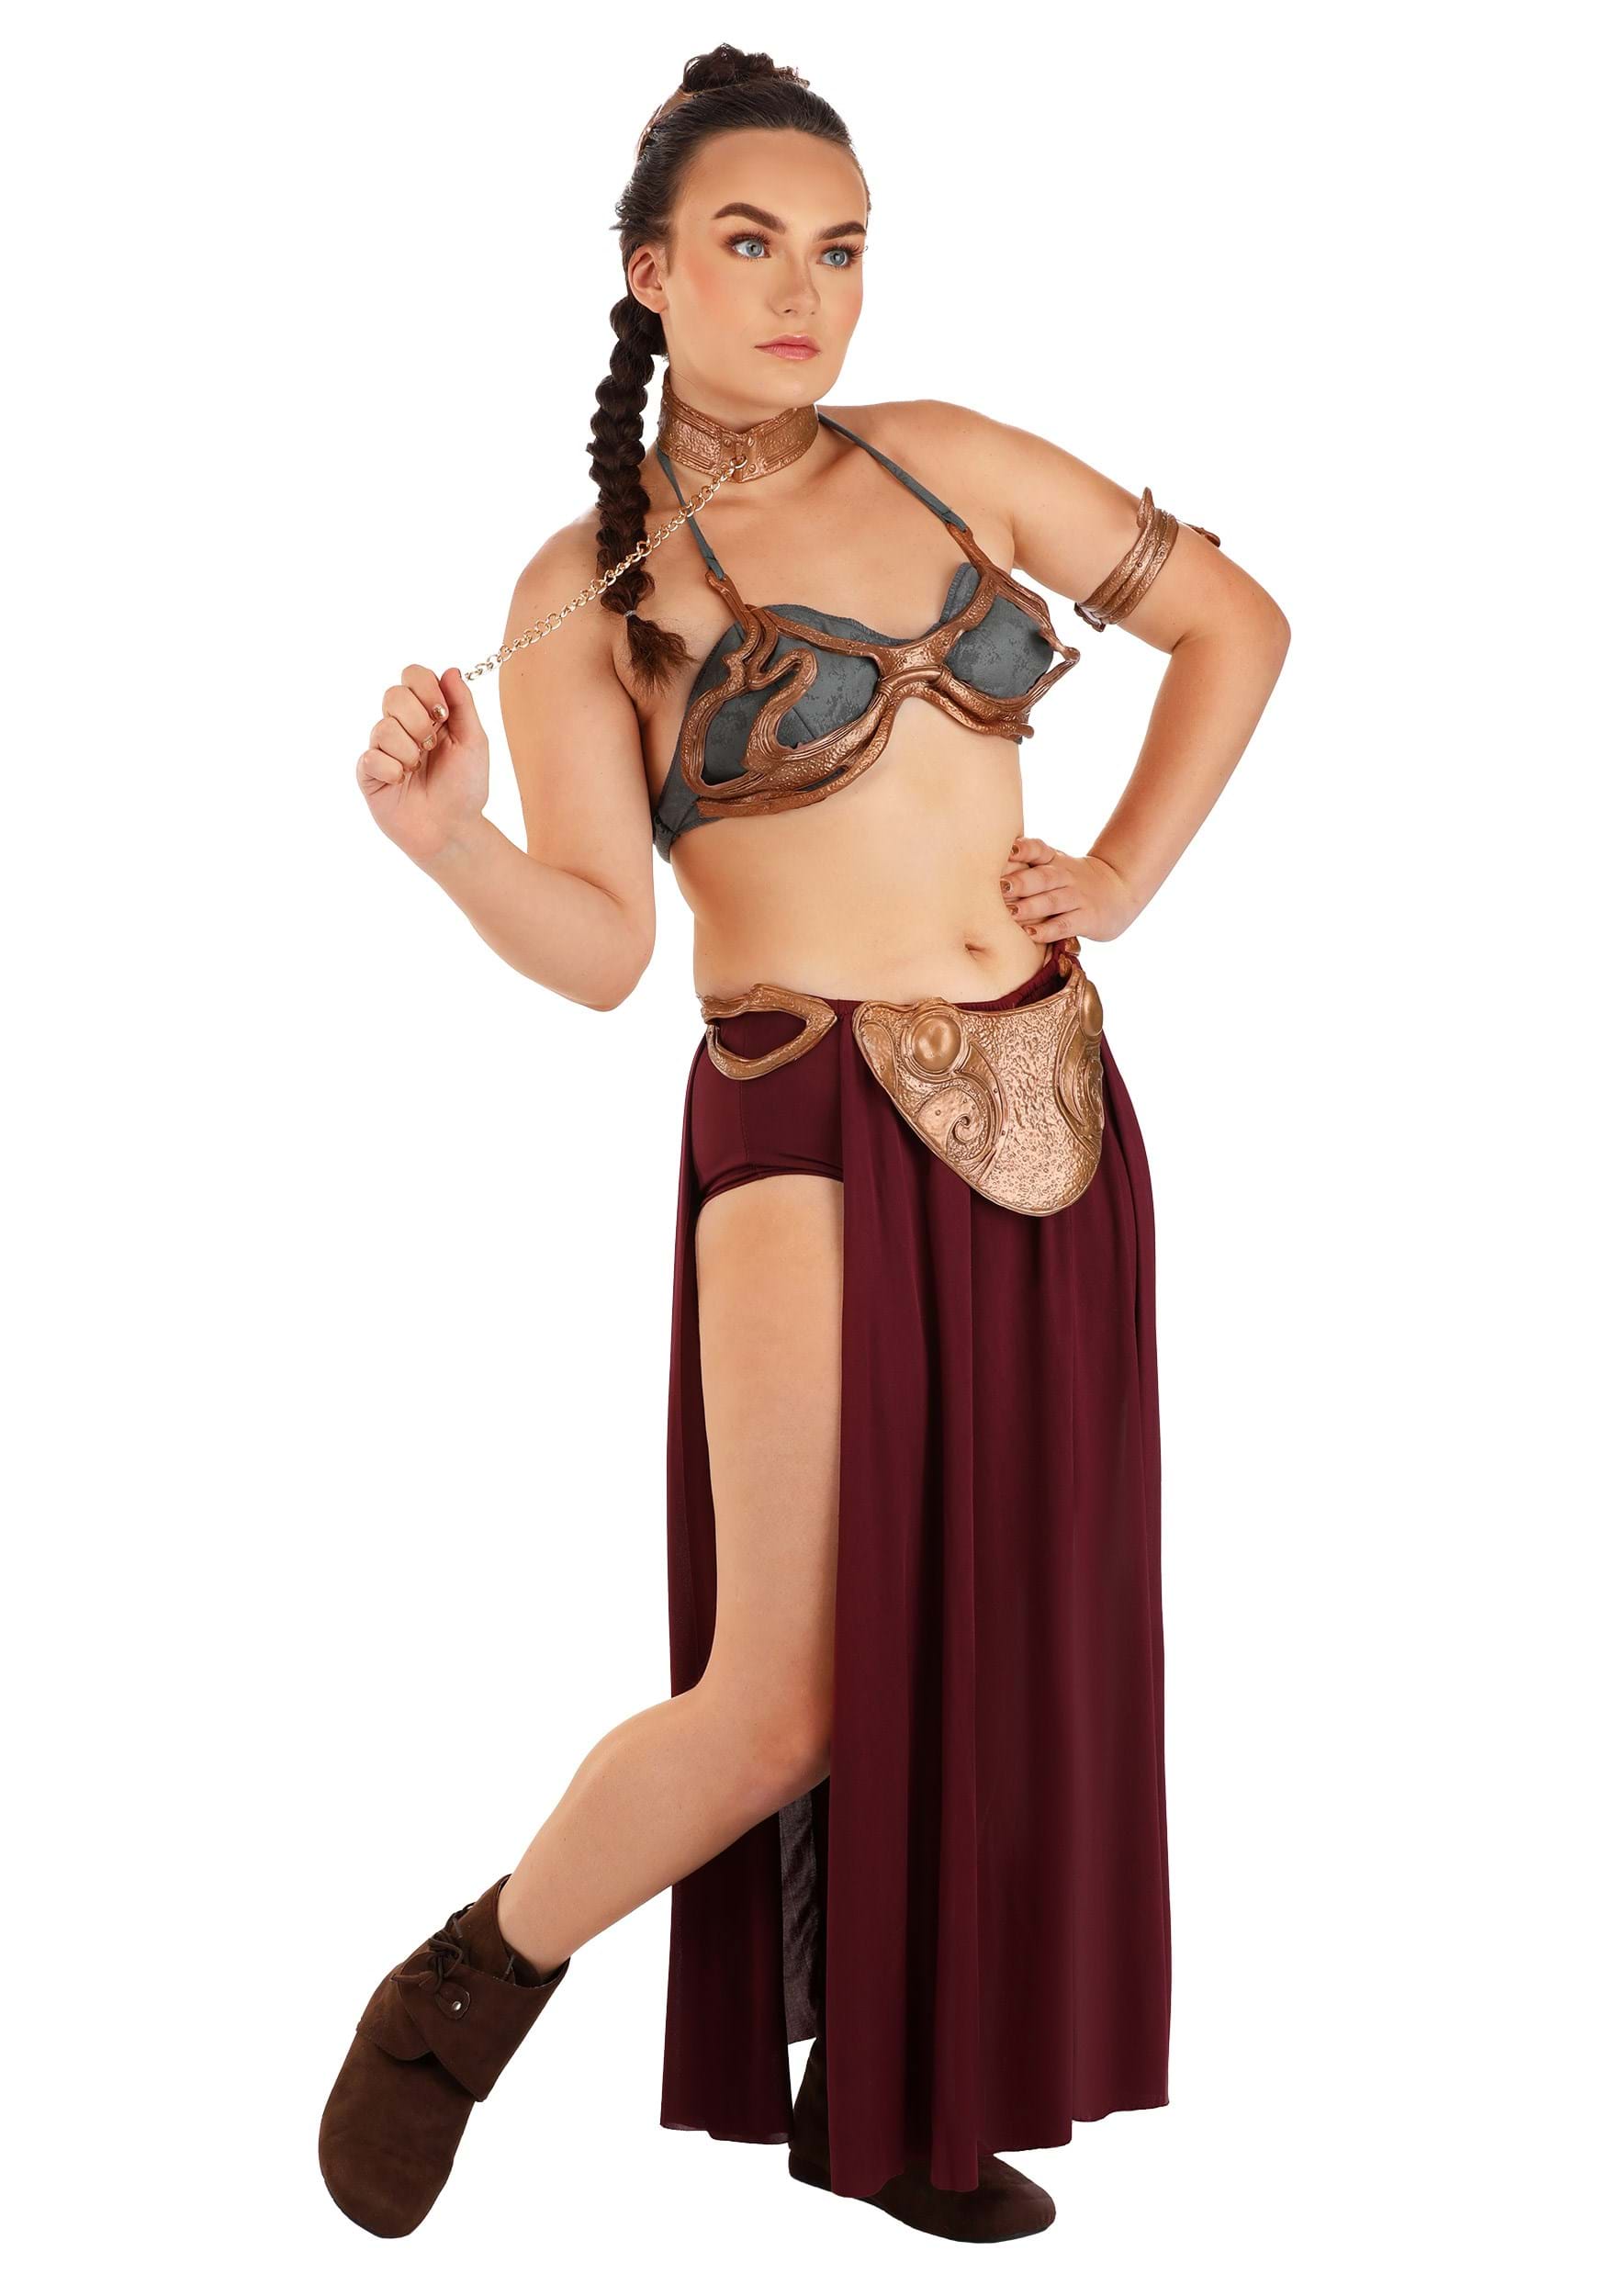 The Panty Selling World According to Star Wars - for Sellers